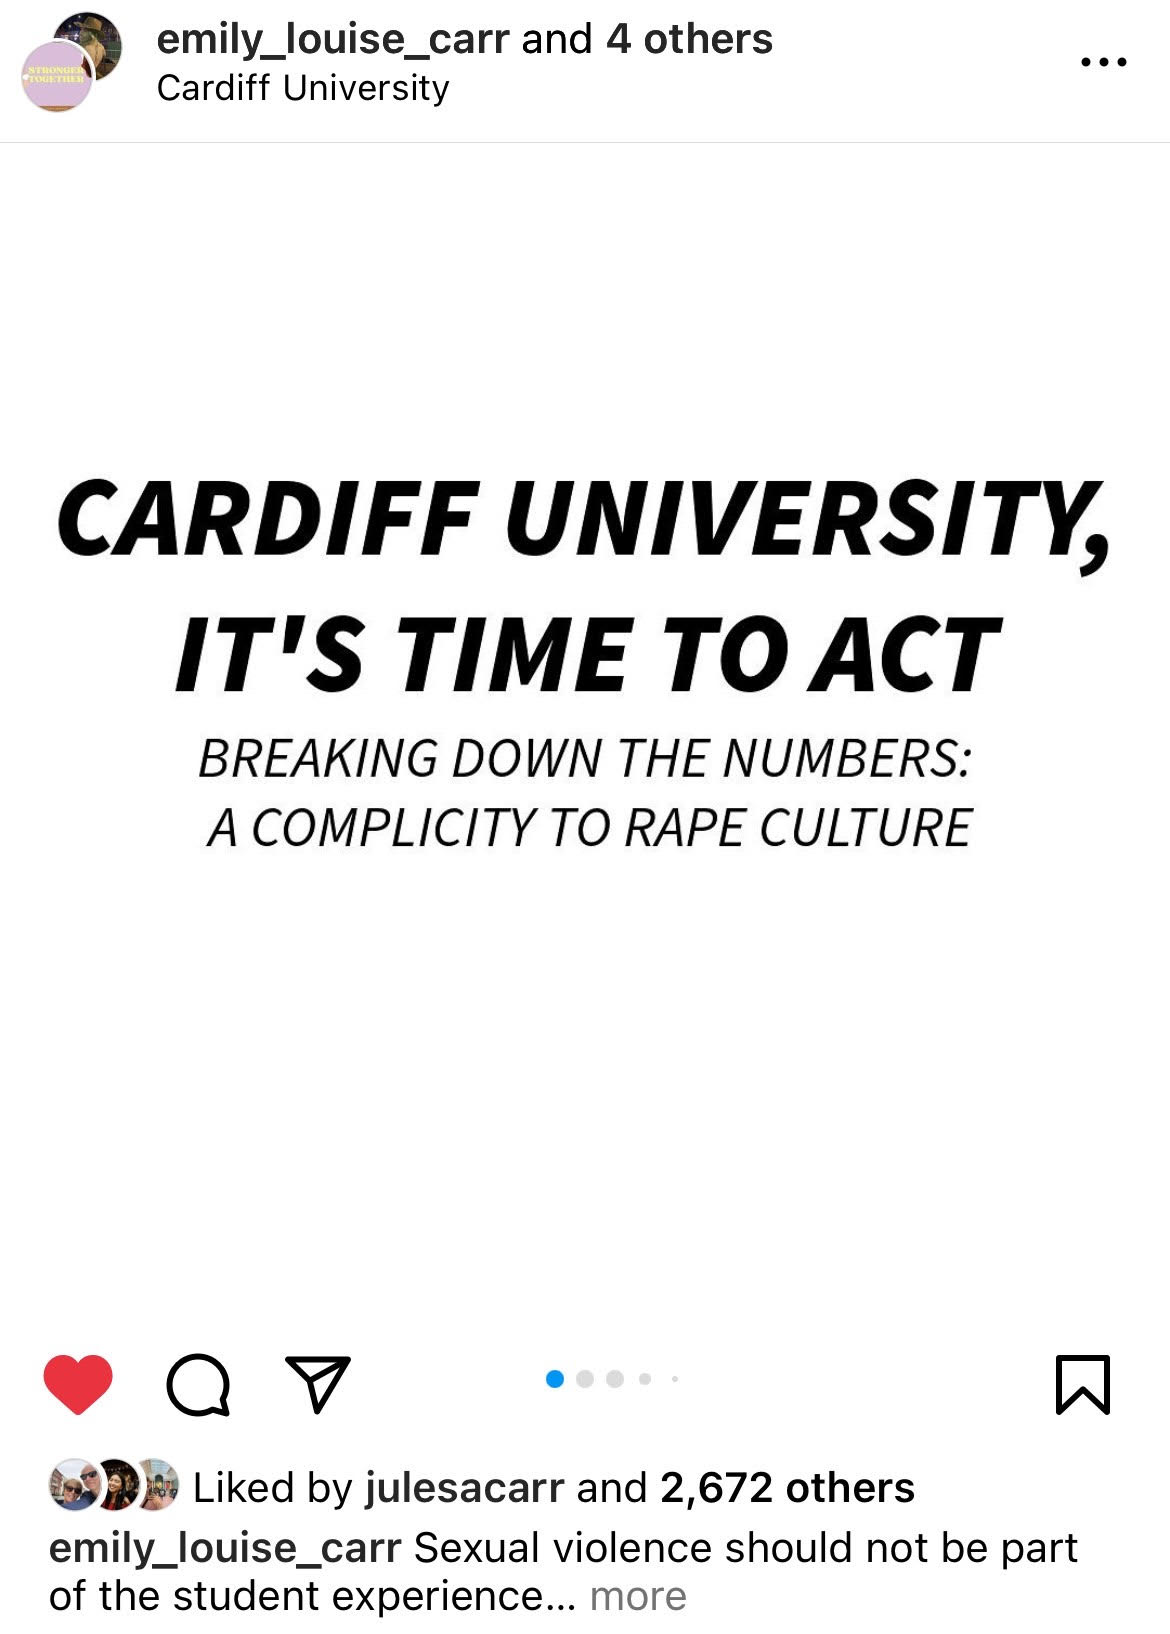 9 emily_louise_carr and 4 others
) Cardiff University

CARDIFF UNIVERSITY,
IT'S TIME TO ACT

BREAKING DOWN THE NUMBERS:
A COMPLICITY TO RAPE CULTURE

® QYvY ’ WN

PJ Liked by julesacarr and 2,672 others

emily_louise_carr Sexual violence should not be part
of the student experience... more